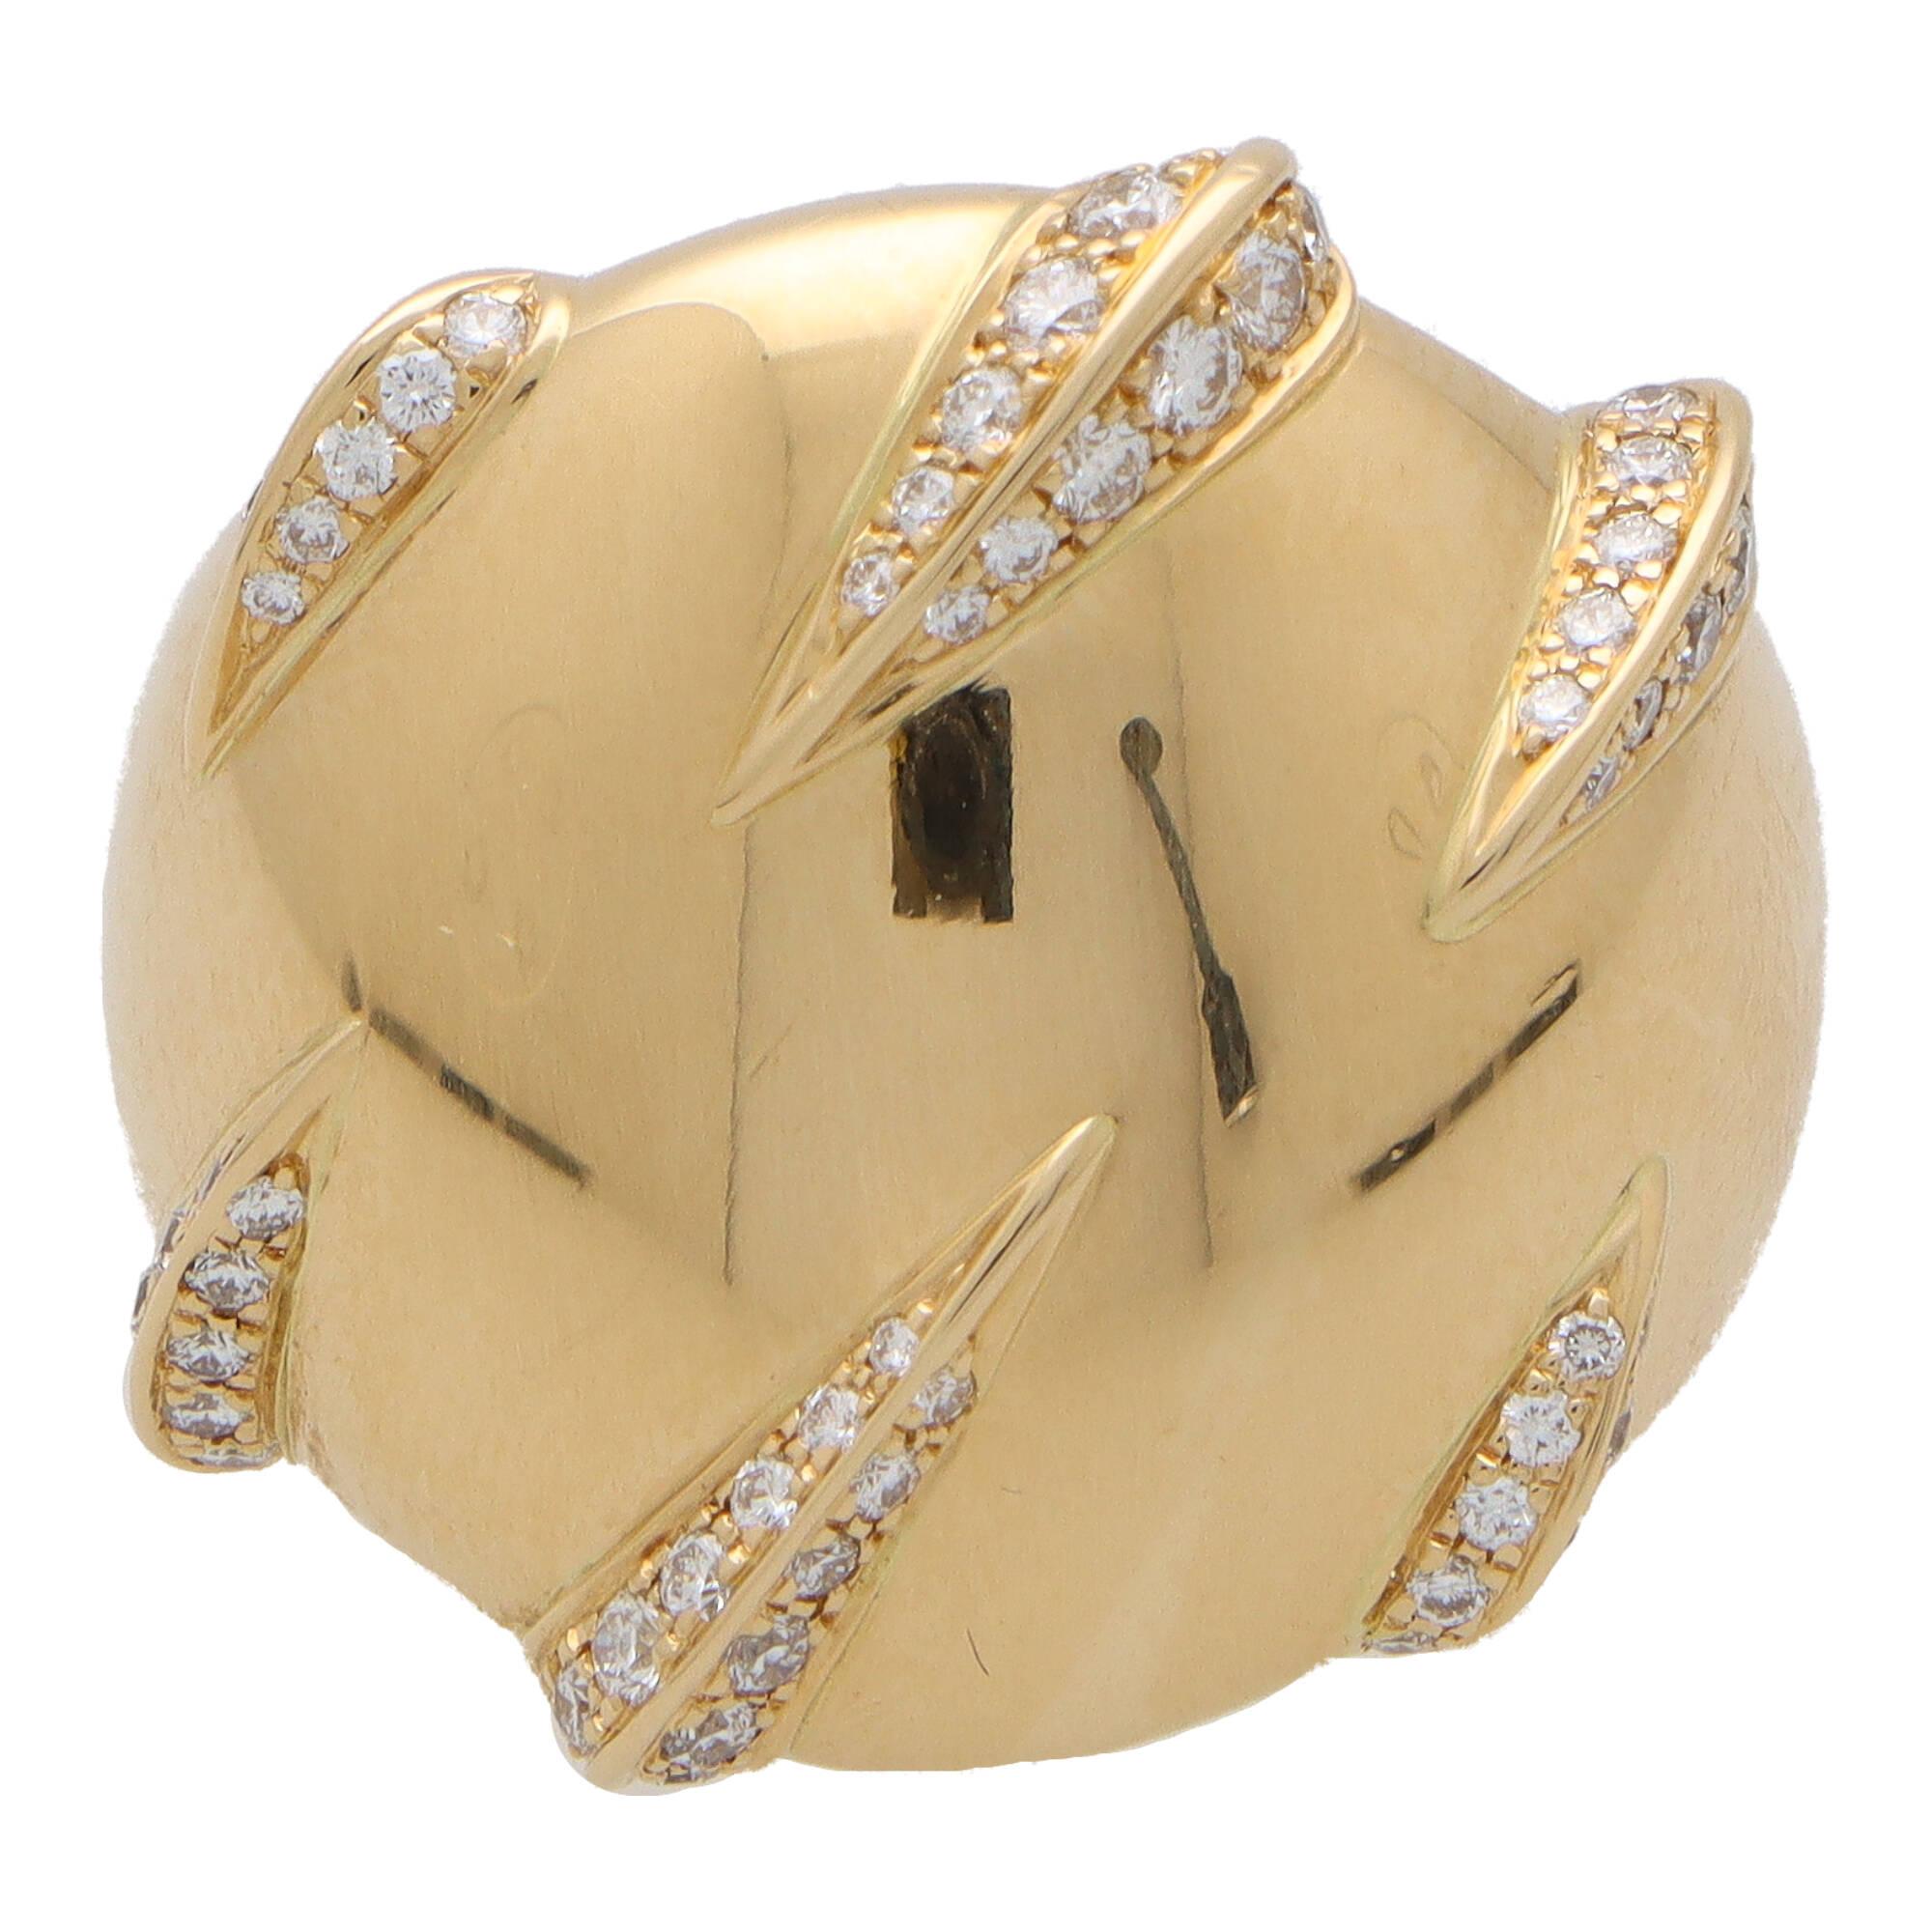 An extremely beautiful vintage Cartier ‘Panther Claw’ diamond ring, set in 18k yellow gold.

This unique looking piece is composed of a large circular motif, with six panther claws grasping around it. Each panther claw is perfectly pave set with